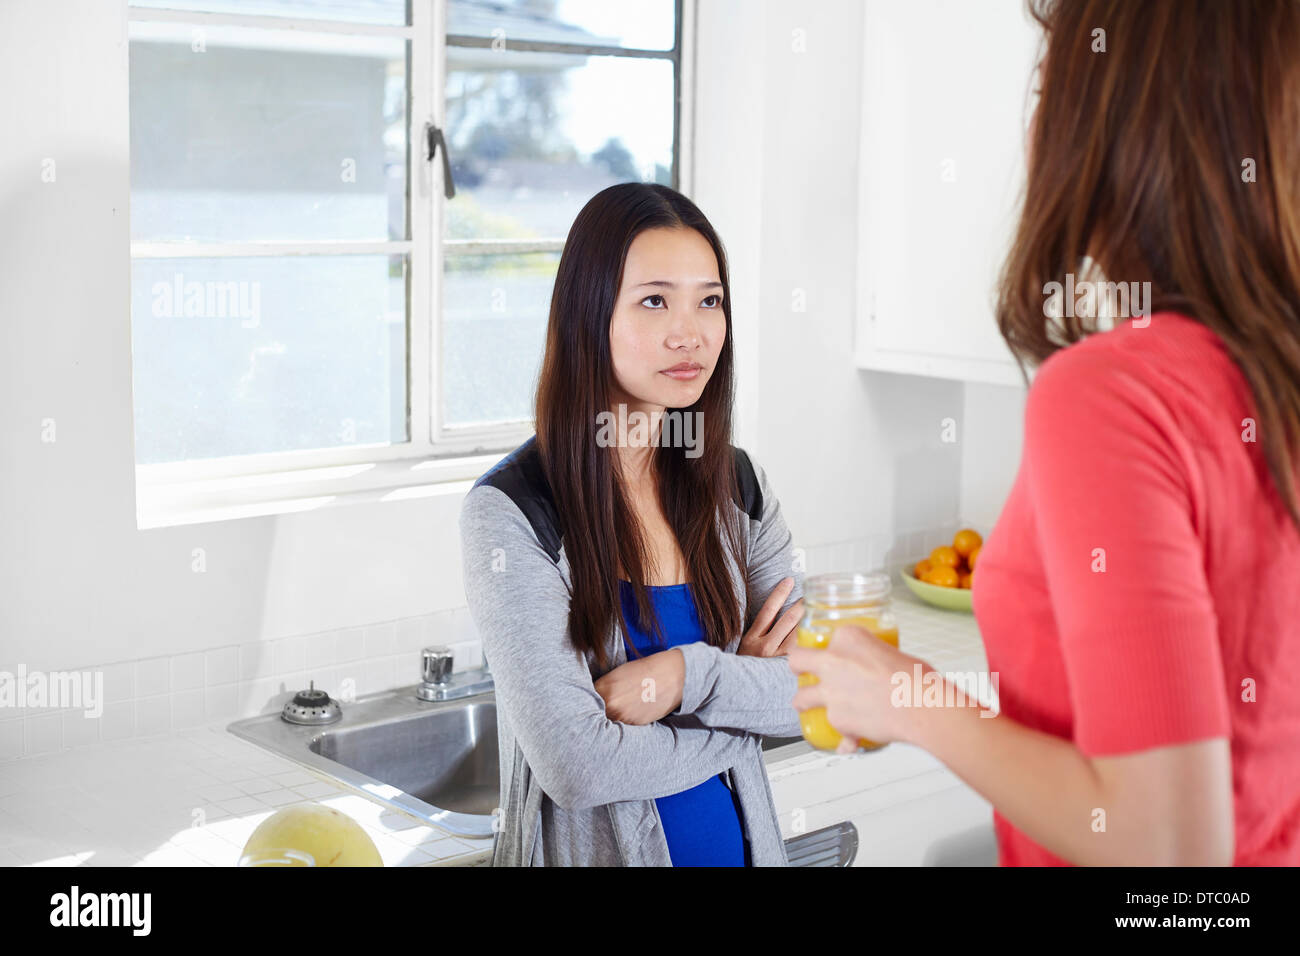 Two young women in kitchen having an argument Stock Photo